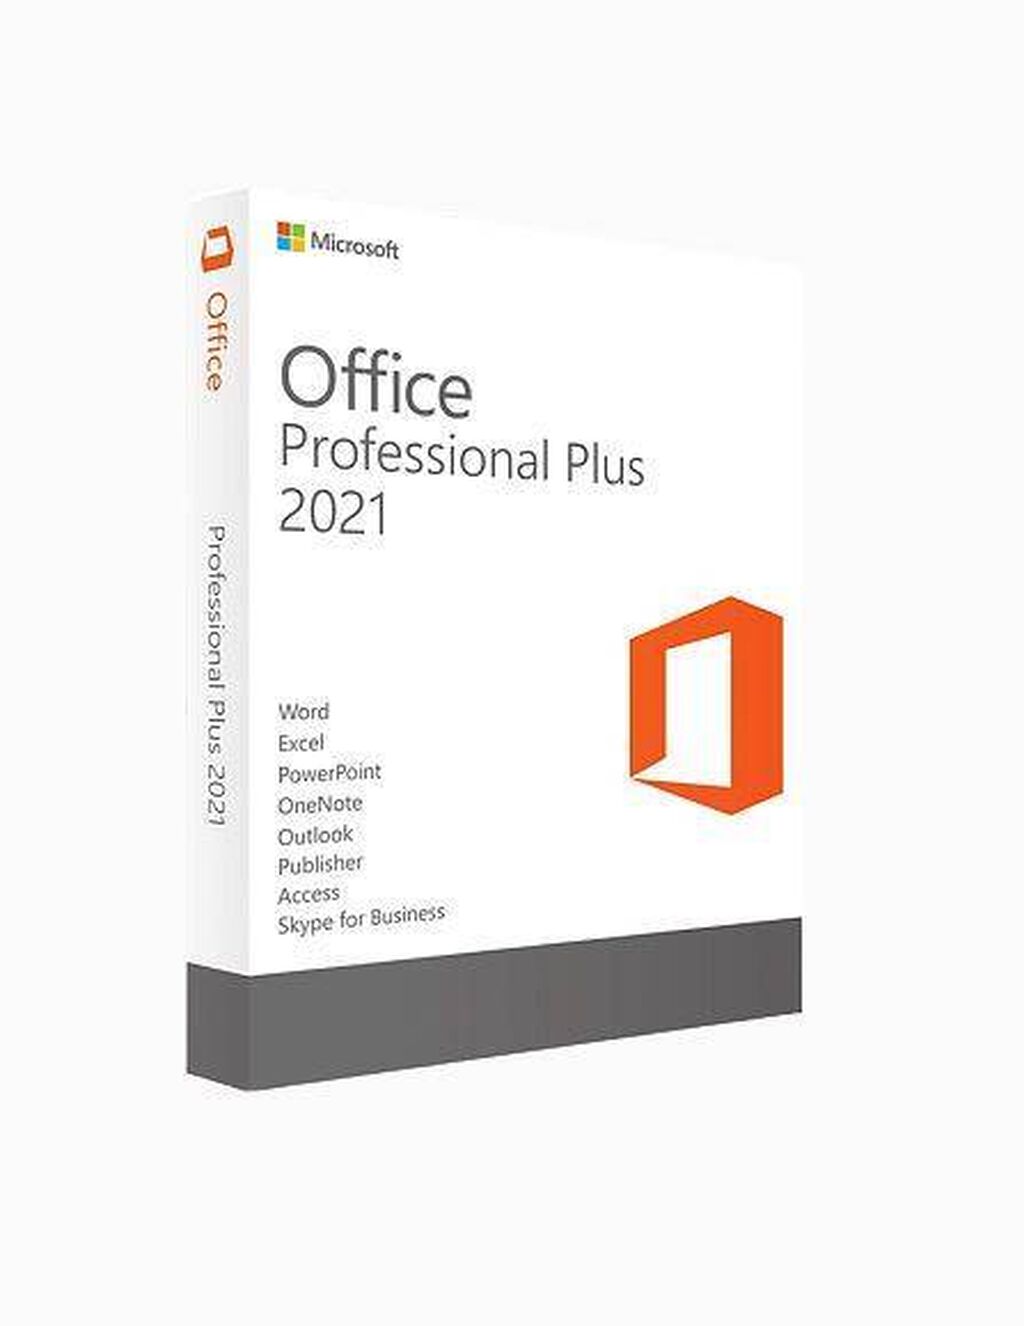 Офис 2016. Office 2016 professional Plus. Office Home and Business 2019 Russian Russia only Medialess. Microsoft Office 2019 professional Plus. Офисное приложение Microsoft 365.